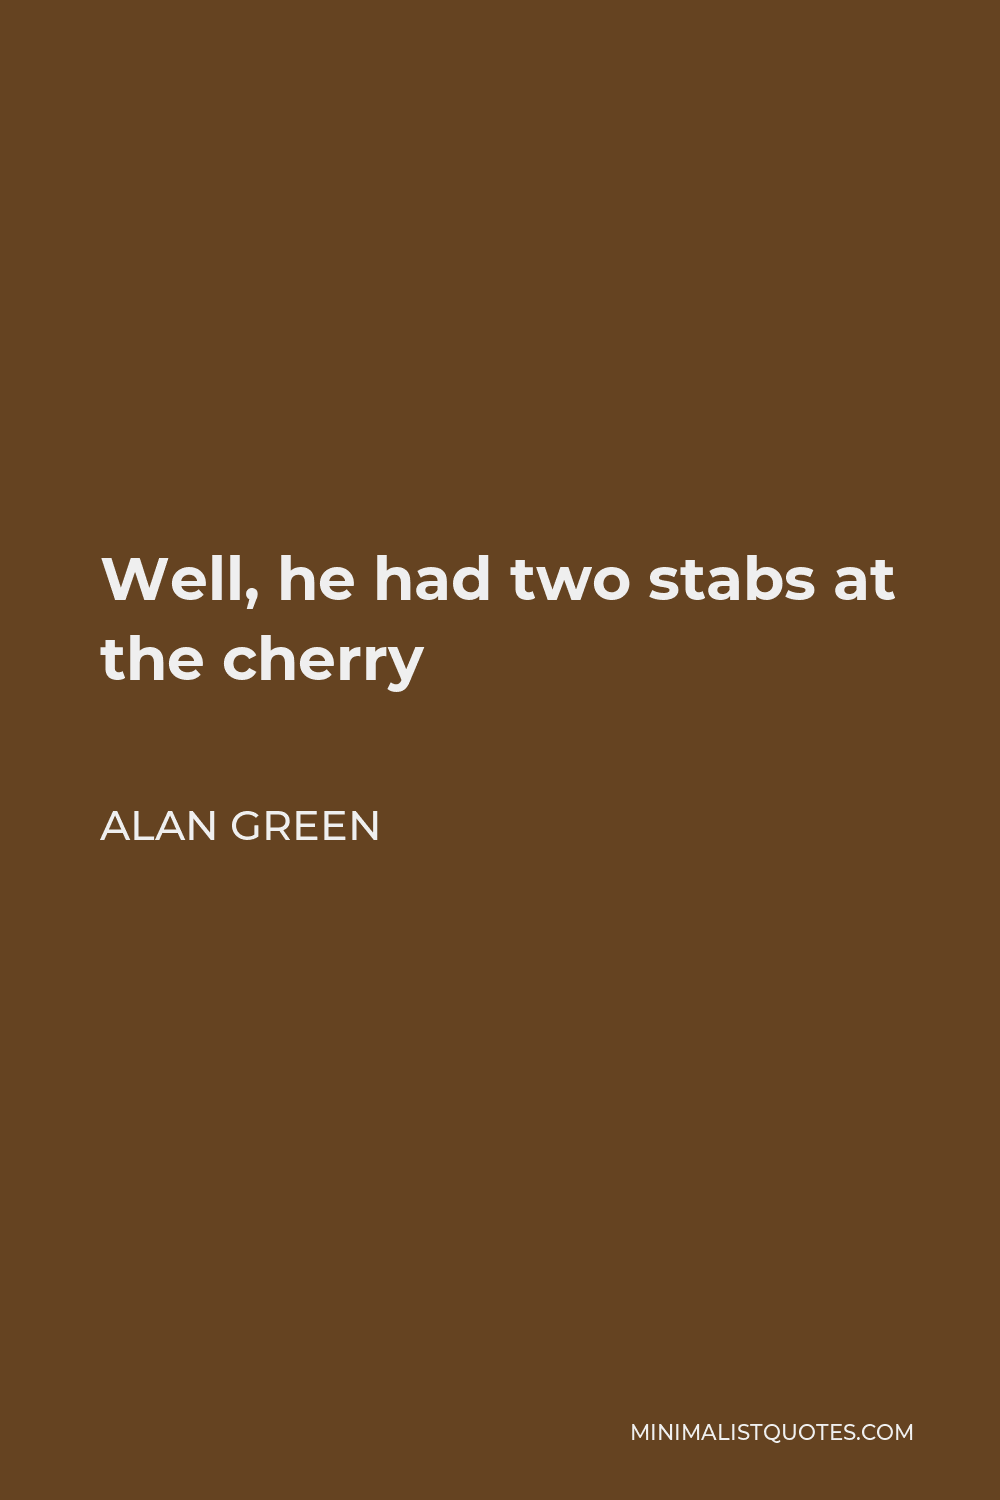 Alan Green Quote - Well, he had two stabs at the cherry